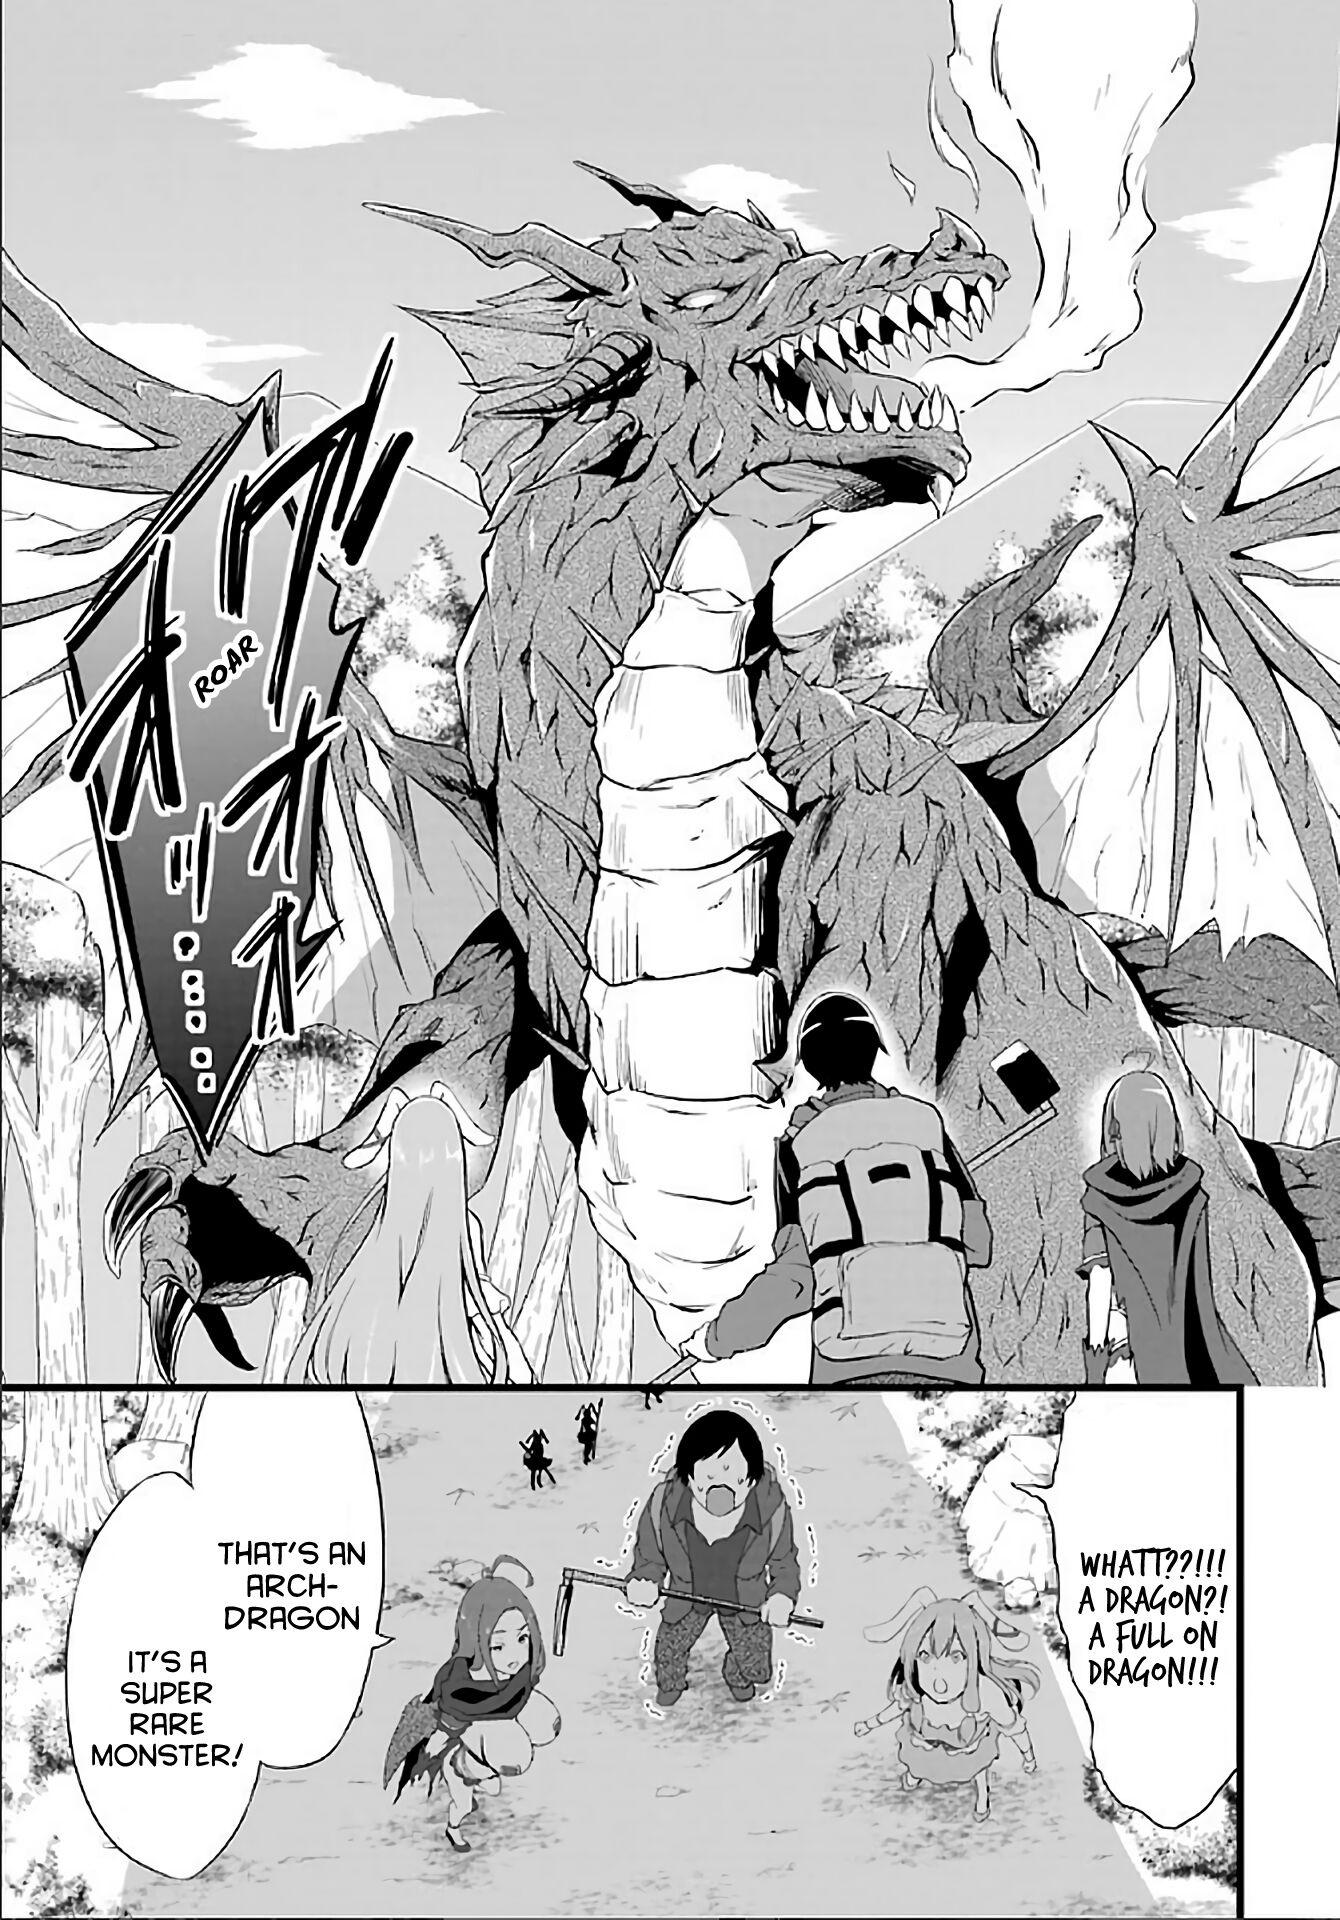 Cheat Mode Farming in Another World Chapter 4 FactManga